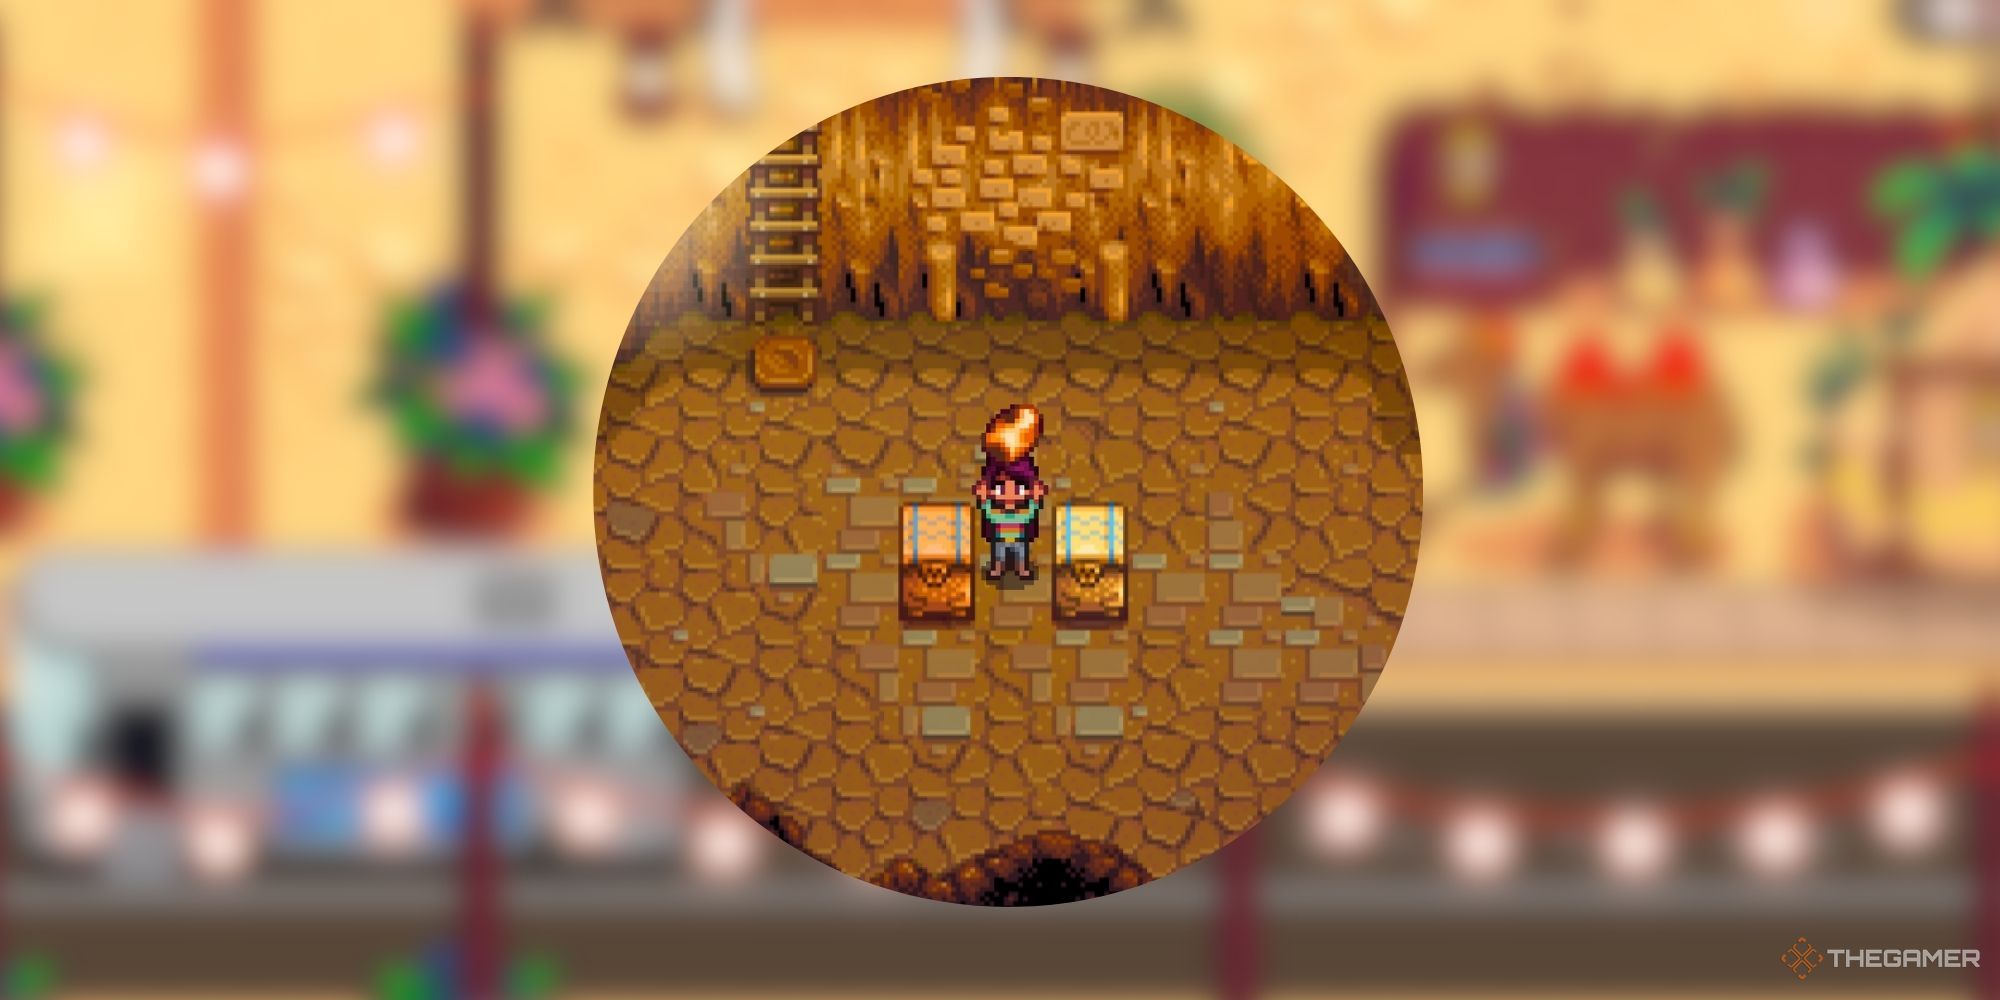 Stardew Valley Farmer Holding Up Calico Egg in the Skull Cavern, over a blurred background